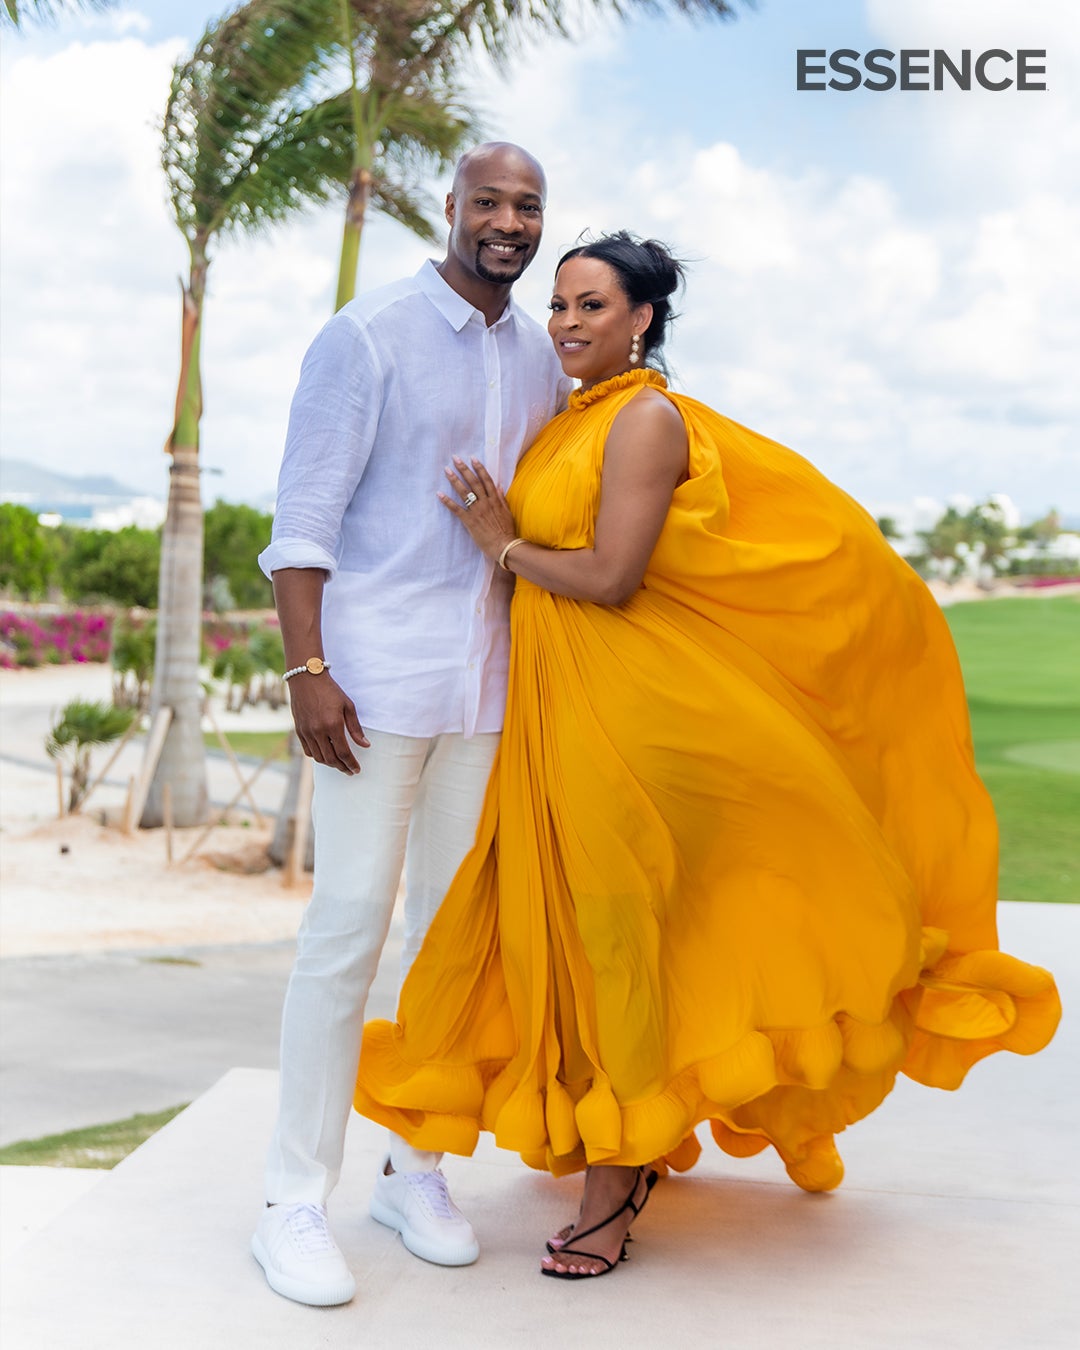 We Were Guests At Shaunie O'Neal And Keion Henderson's Wedding In Anguilla And Have The Photos To Prove It